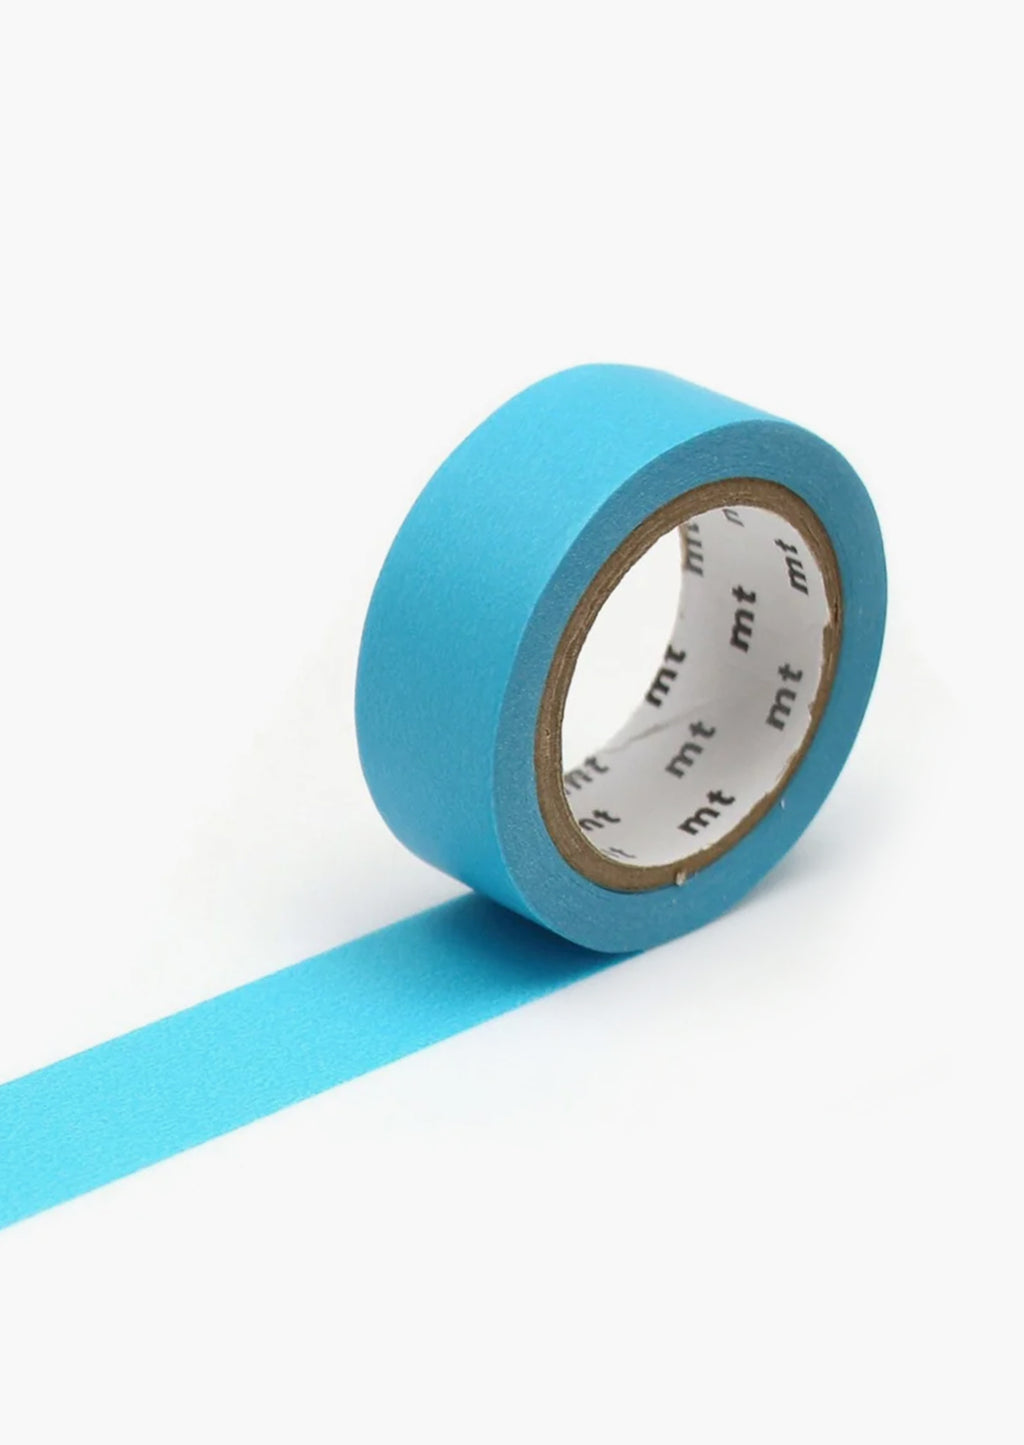 Turquoise: A roll of washi tape in solid turquoise color.